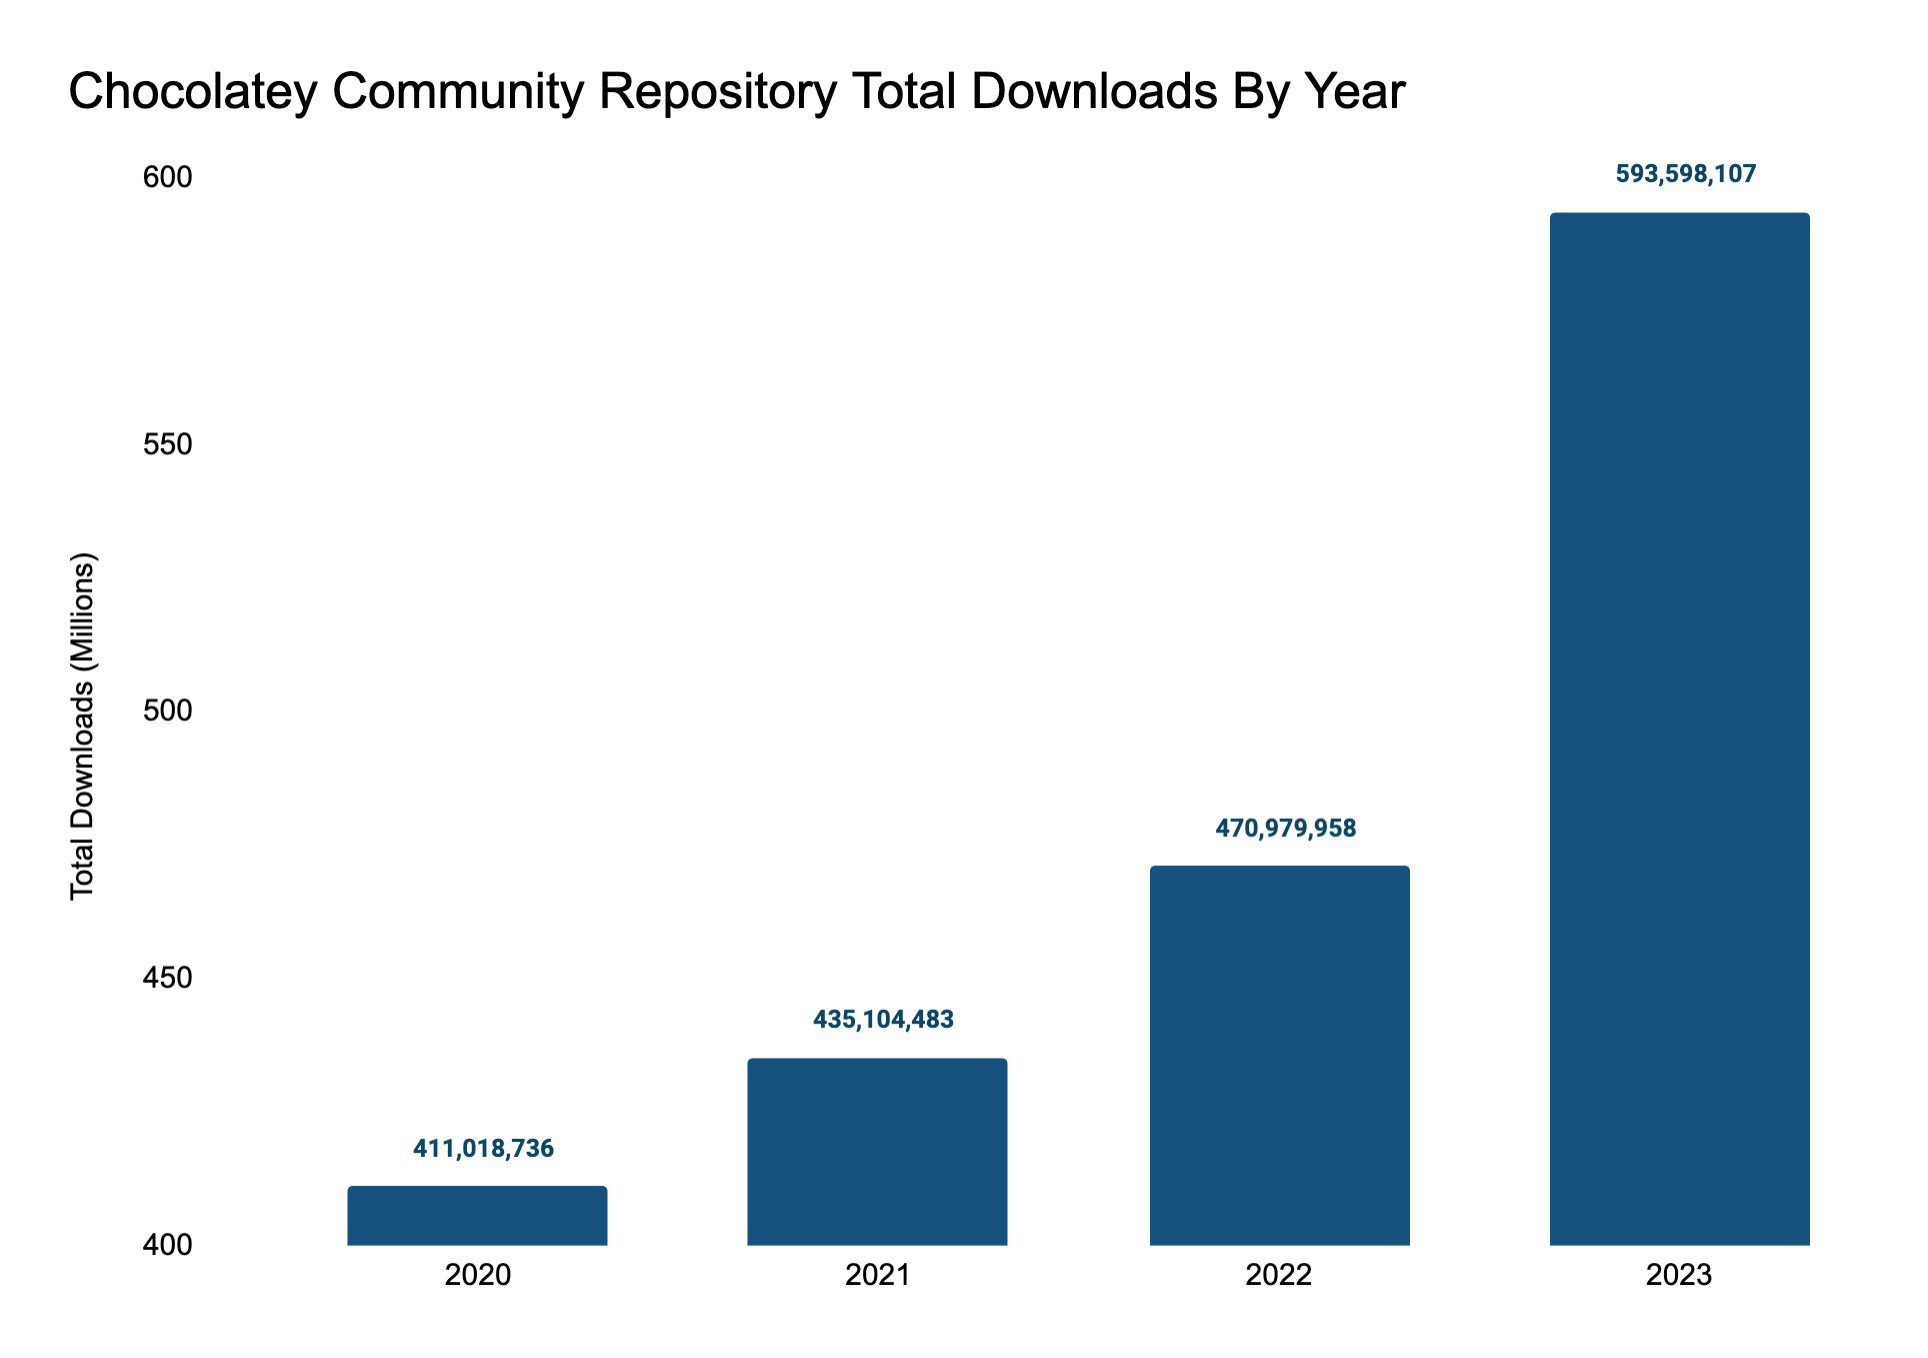 Community Repository Total Downloads from 2020 to 2023